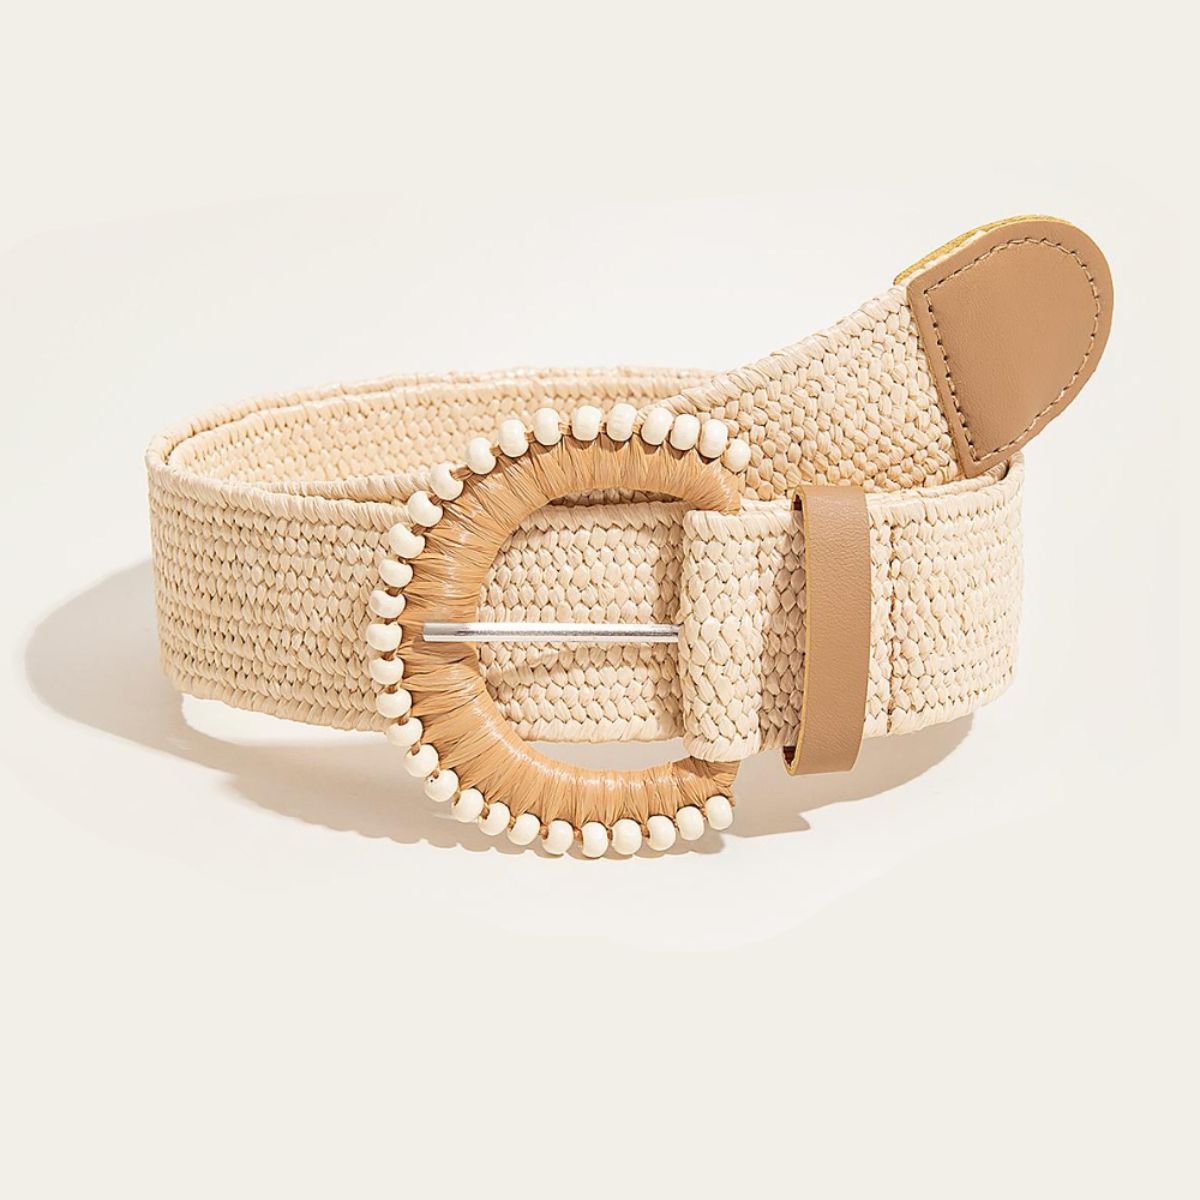 Bead Buckle Woven Belt Sand One Size 